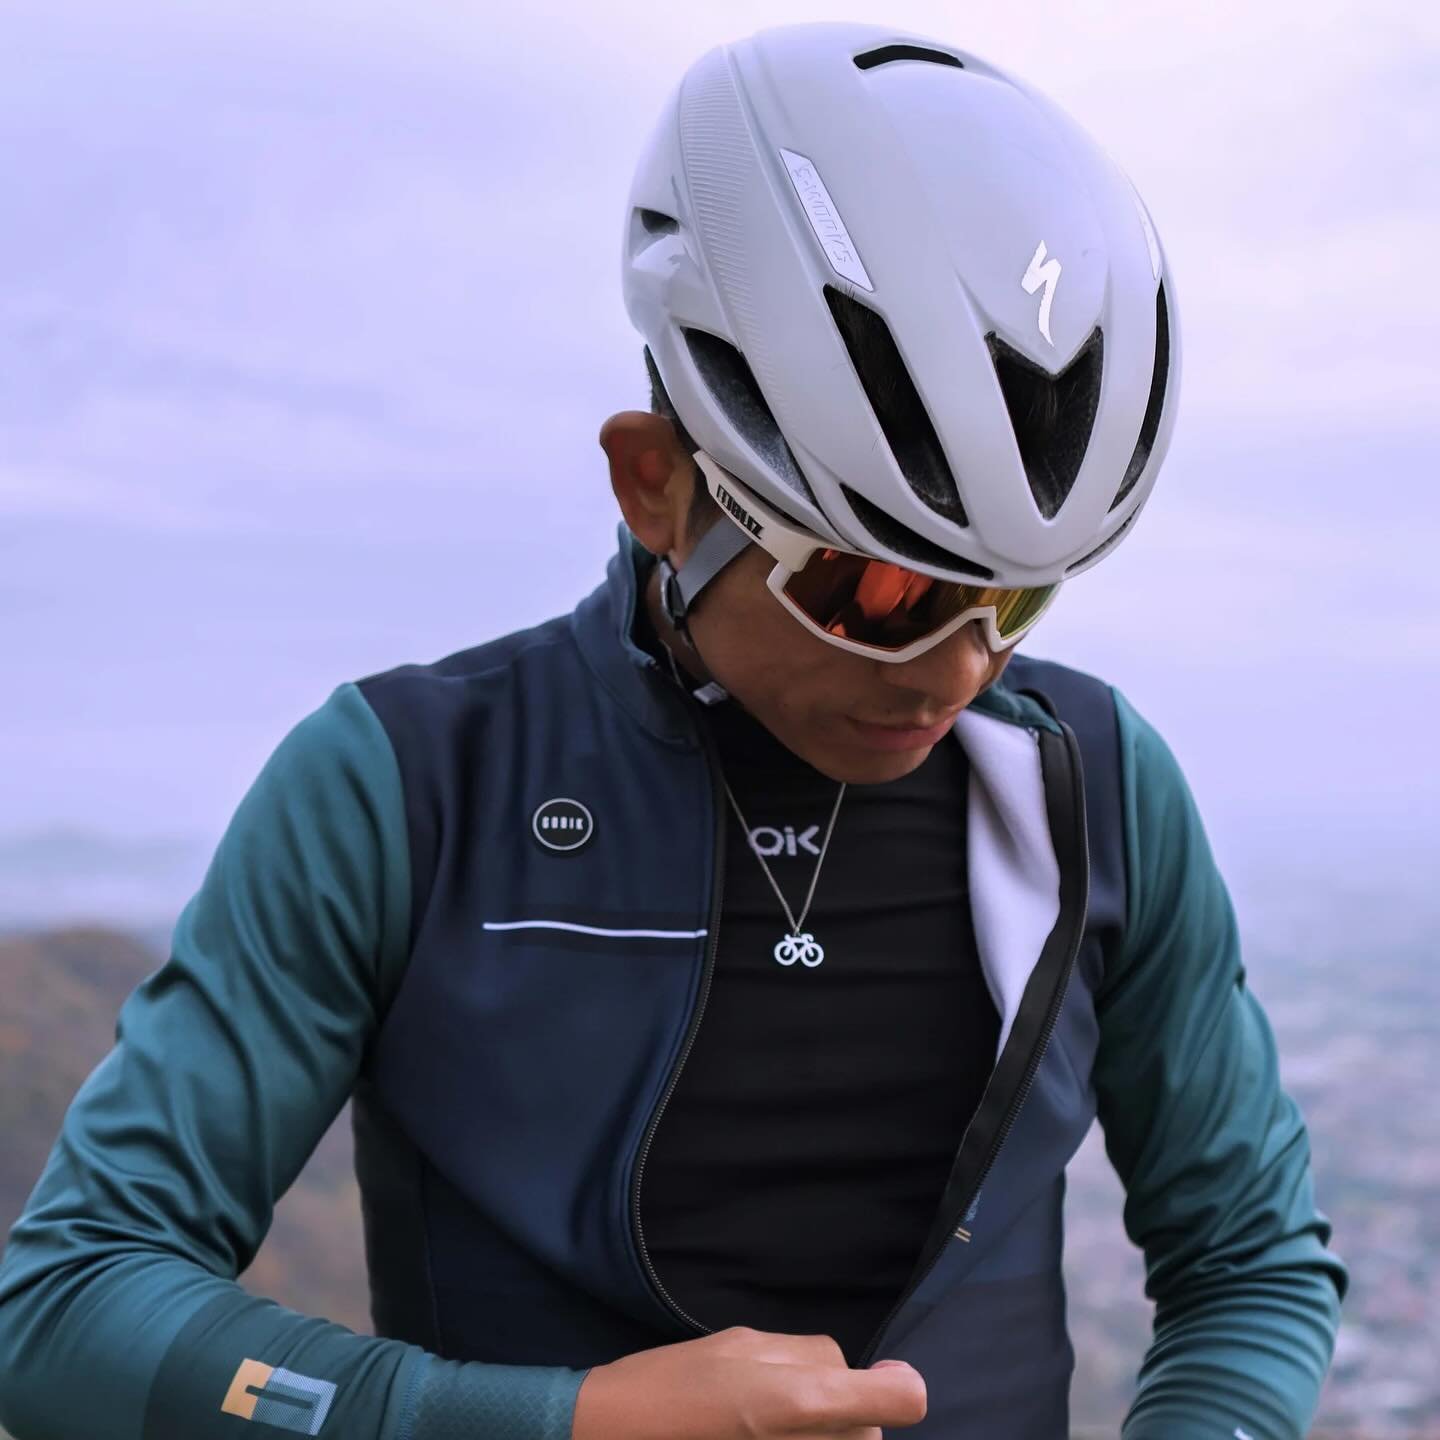 🌟 Introducing the Latest Sailbrace Collections! 🌟

🚴&zwj;♂️ Cycling Collection:
Gear up for adventure with our vibrant Cycling Collection! Choose from a range of colors to match your gear and showcase your love for cycling wherever you go. Ride wi